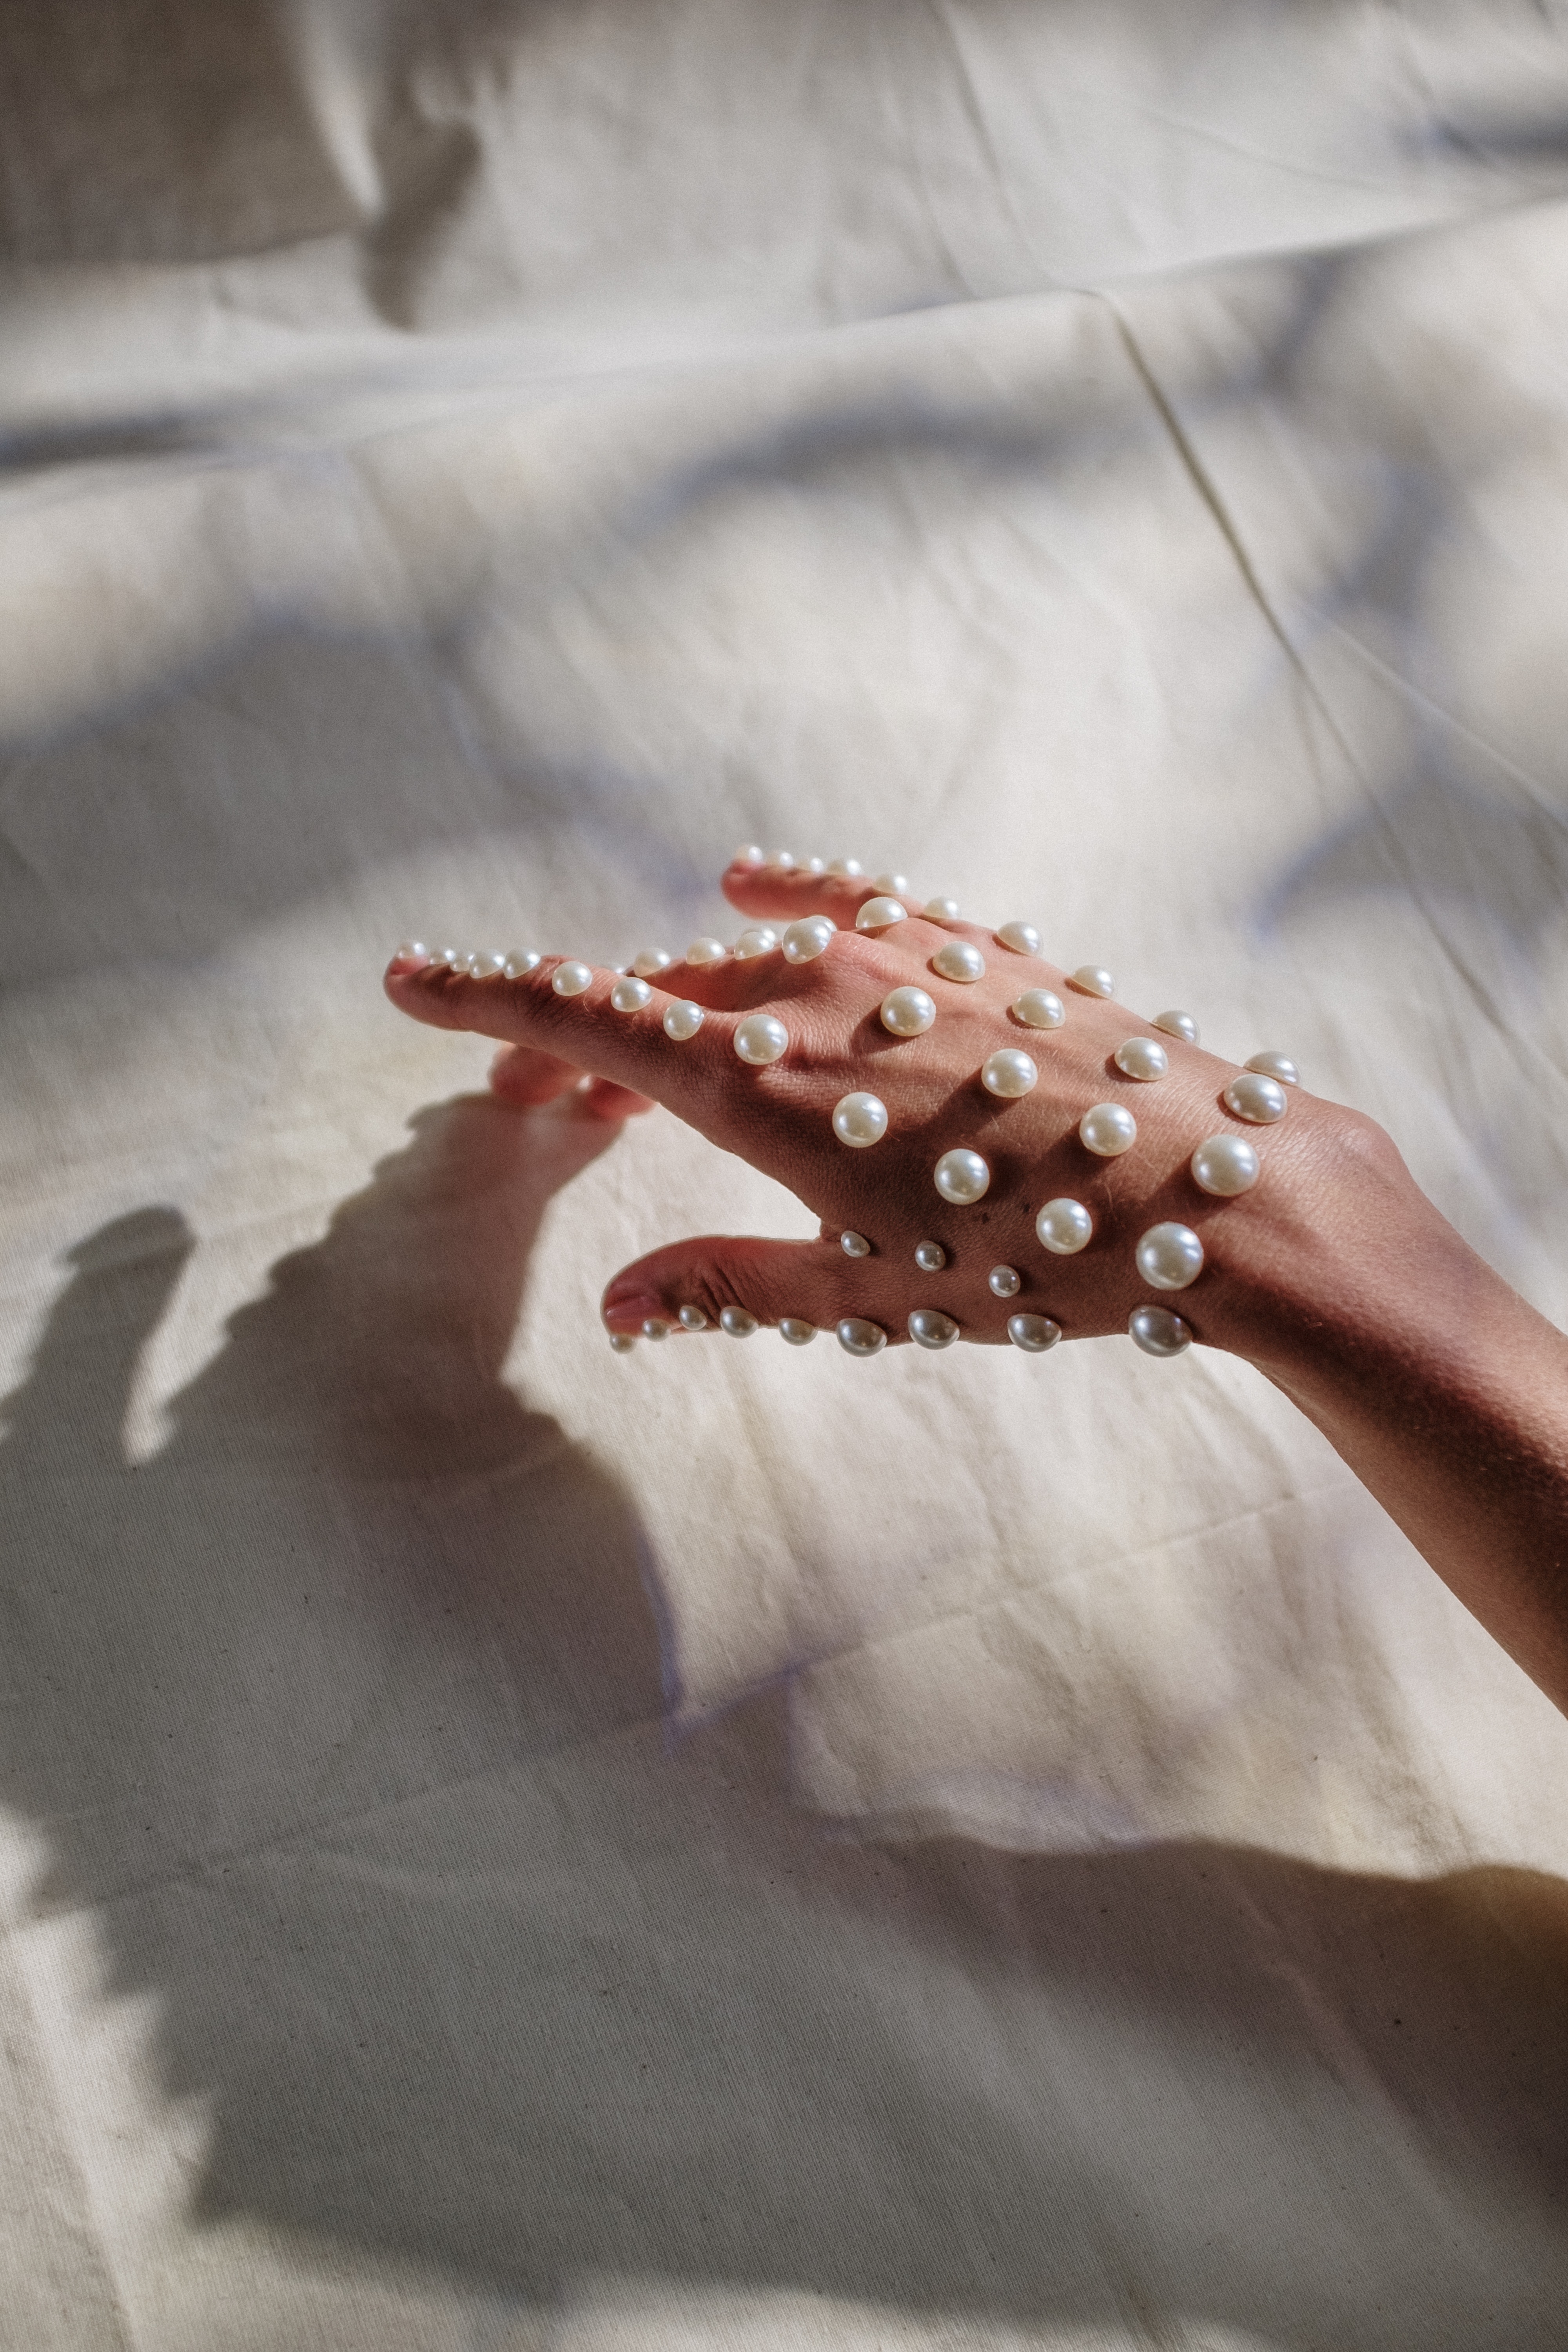 Pearls on hand touching white fabric